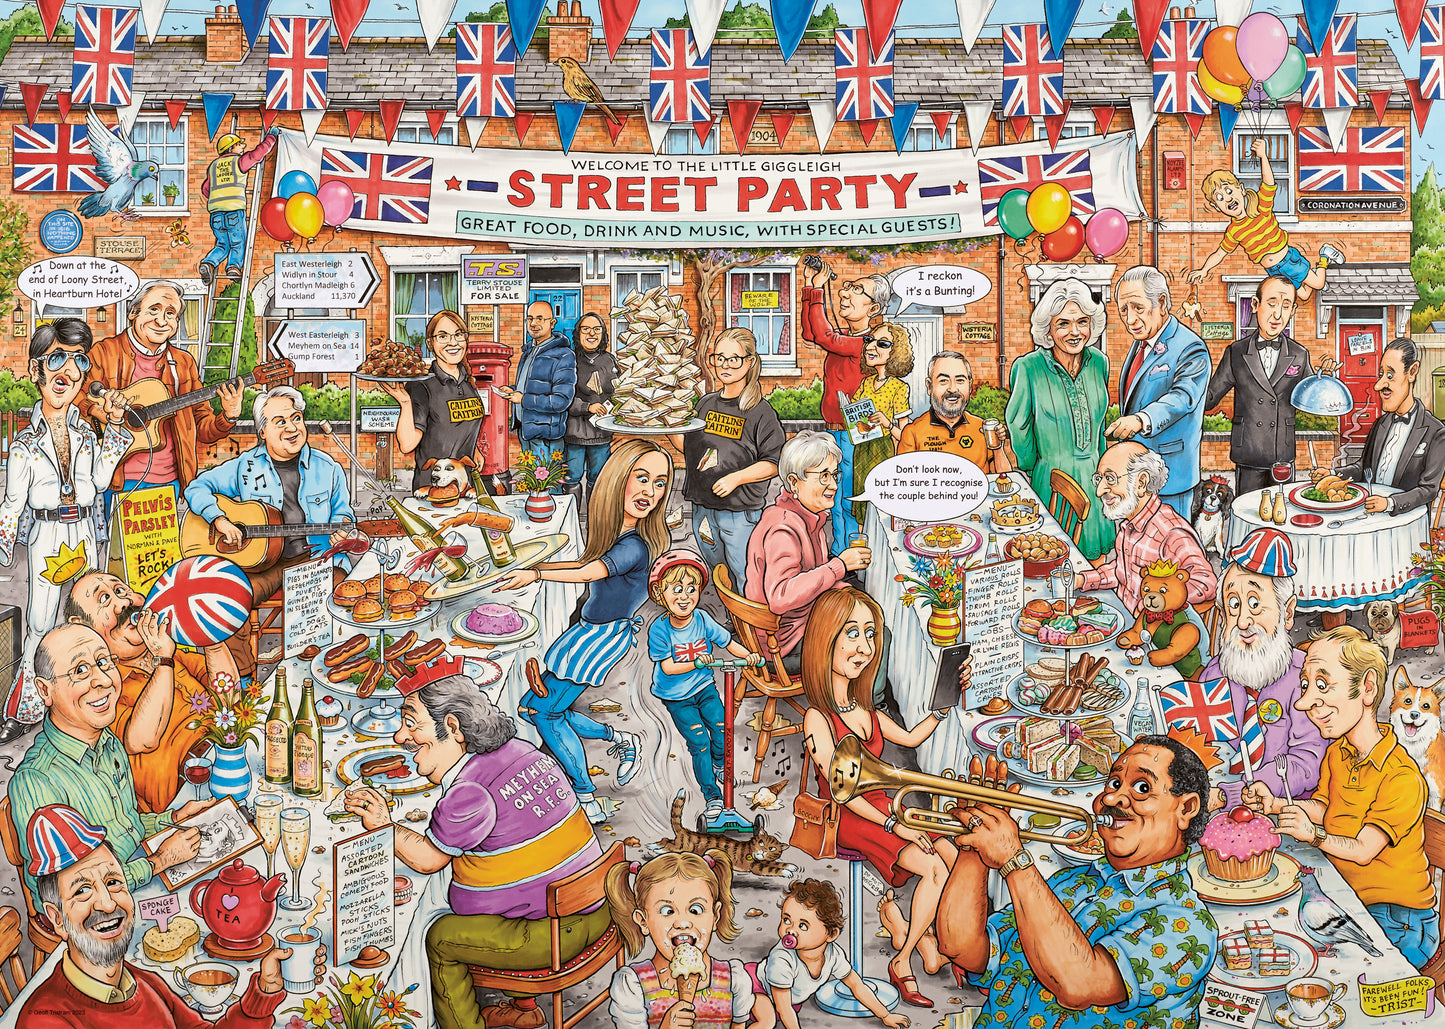 Ravensburger - Best of British No.24 The Street Party - 1000 Piece Jigsaw Puzzle